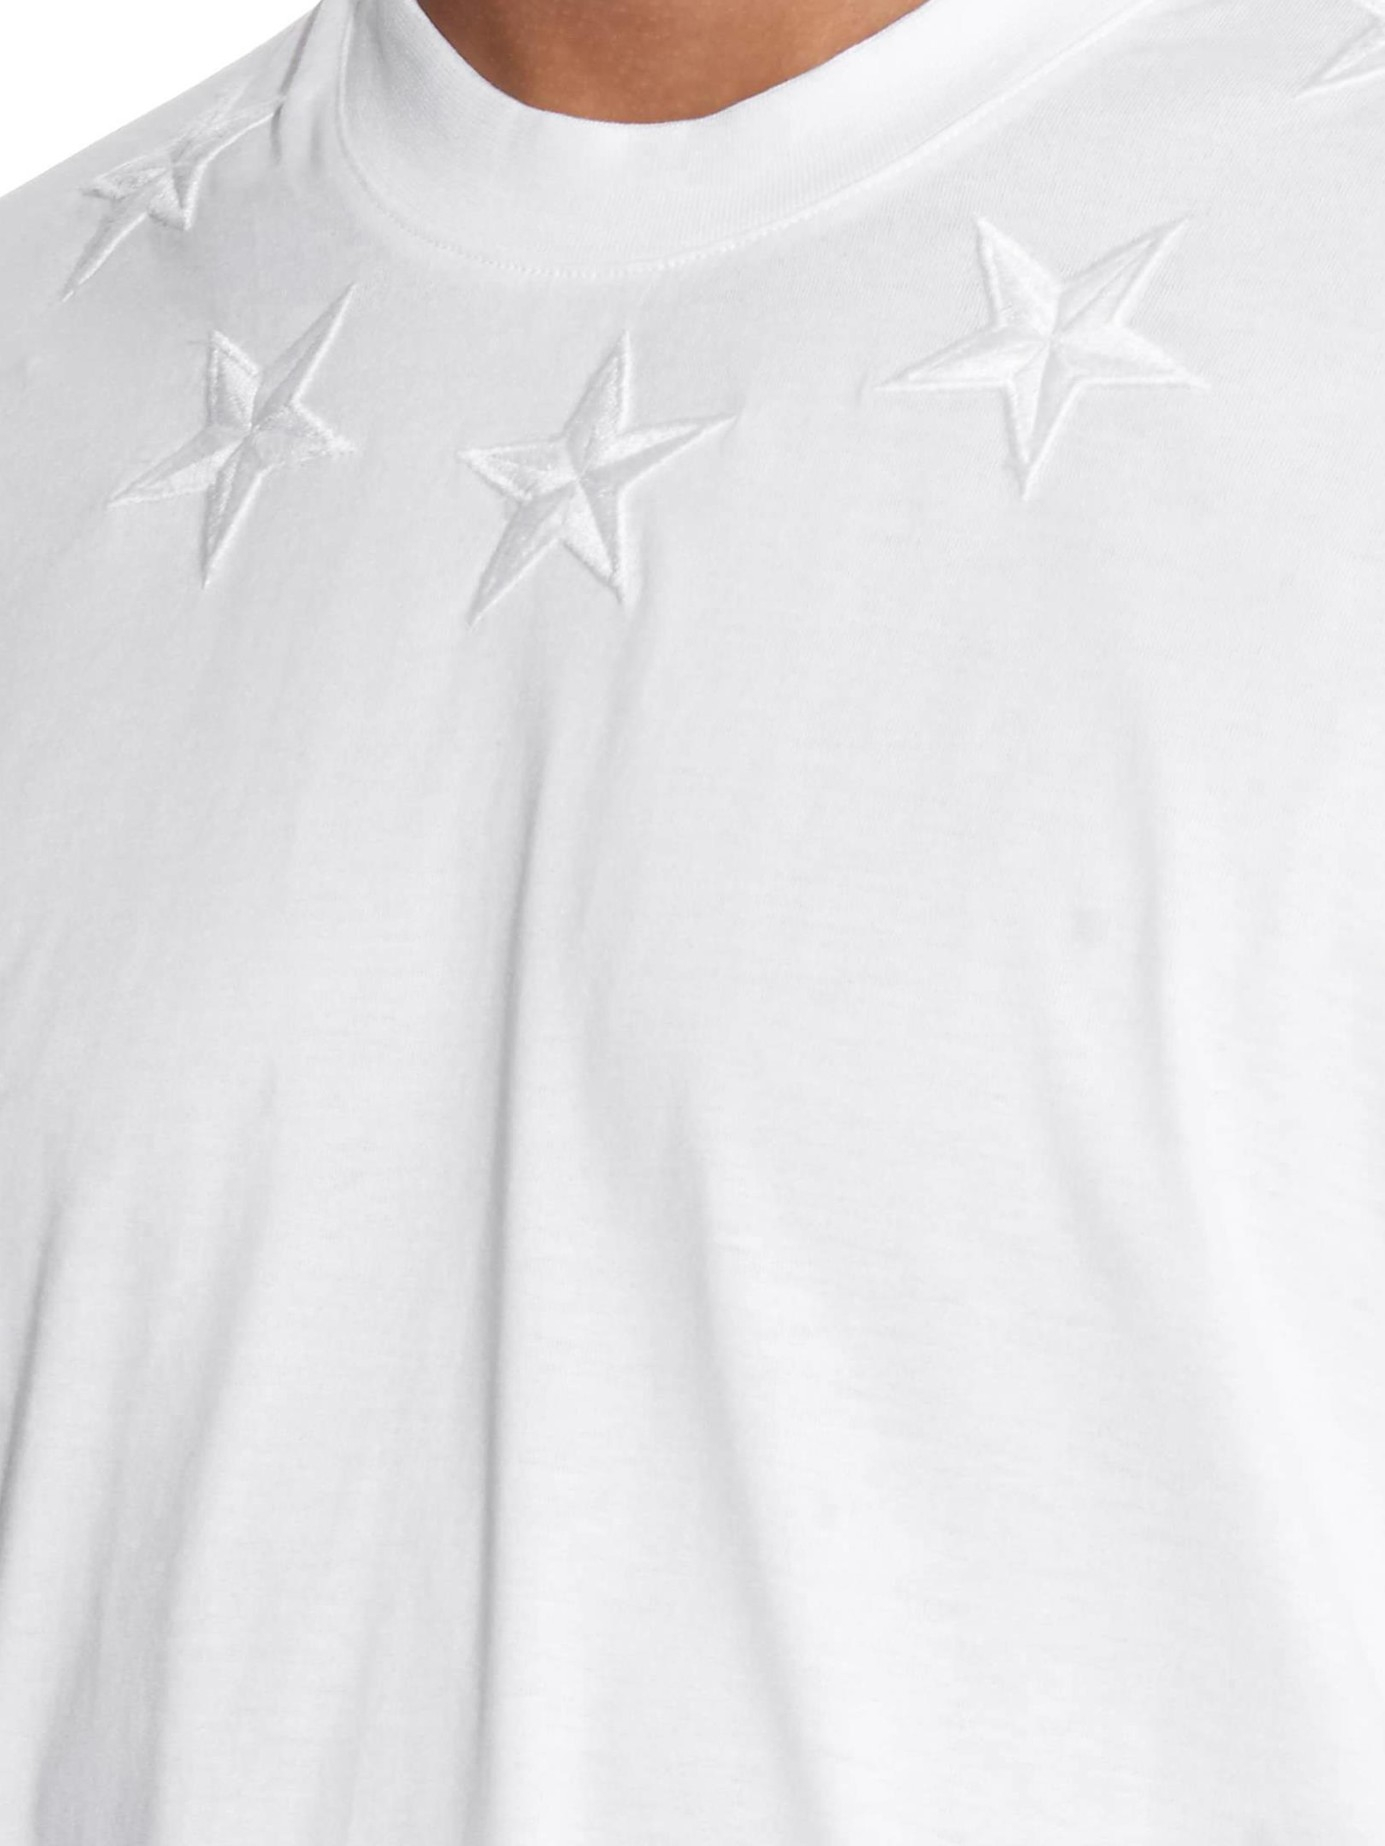 Givenchy White T Shirt Stars Online, SAVE 36% - online-pmo.com